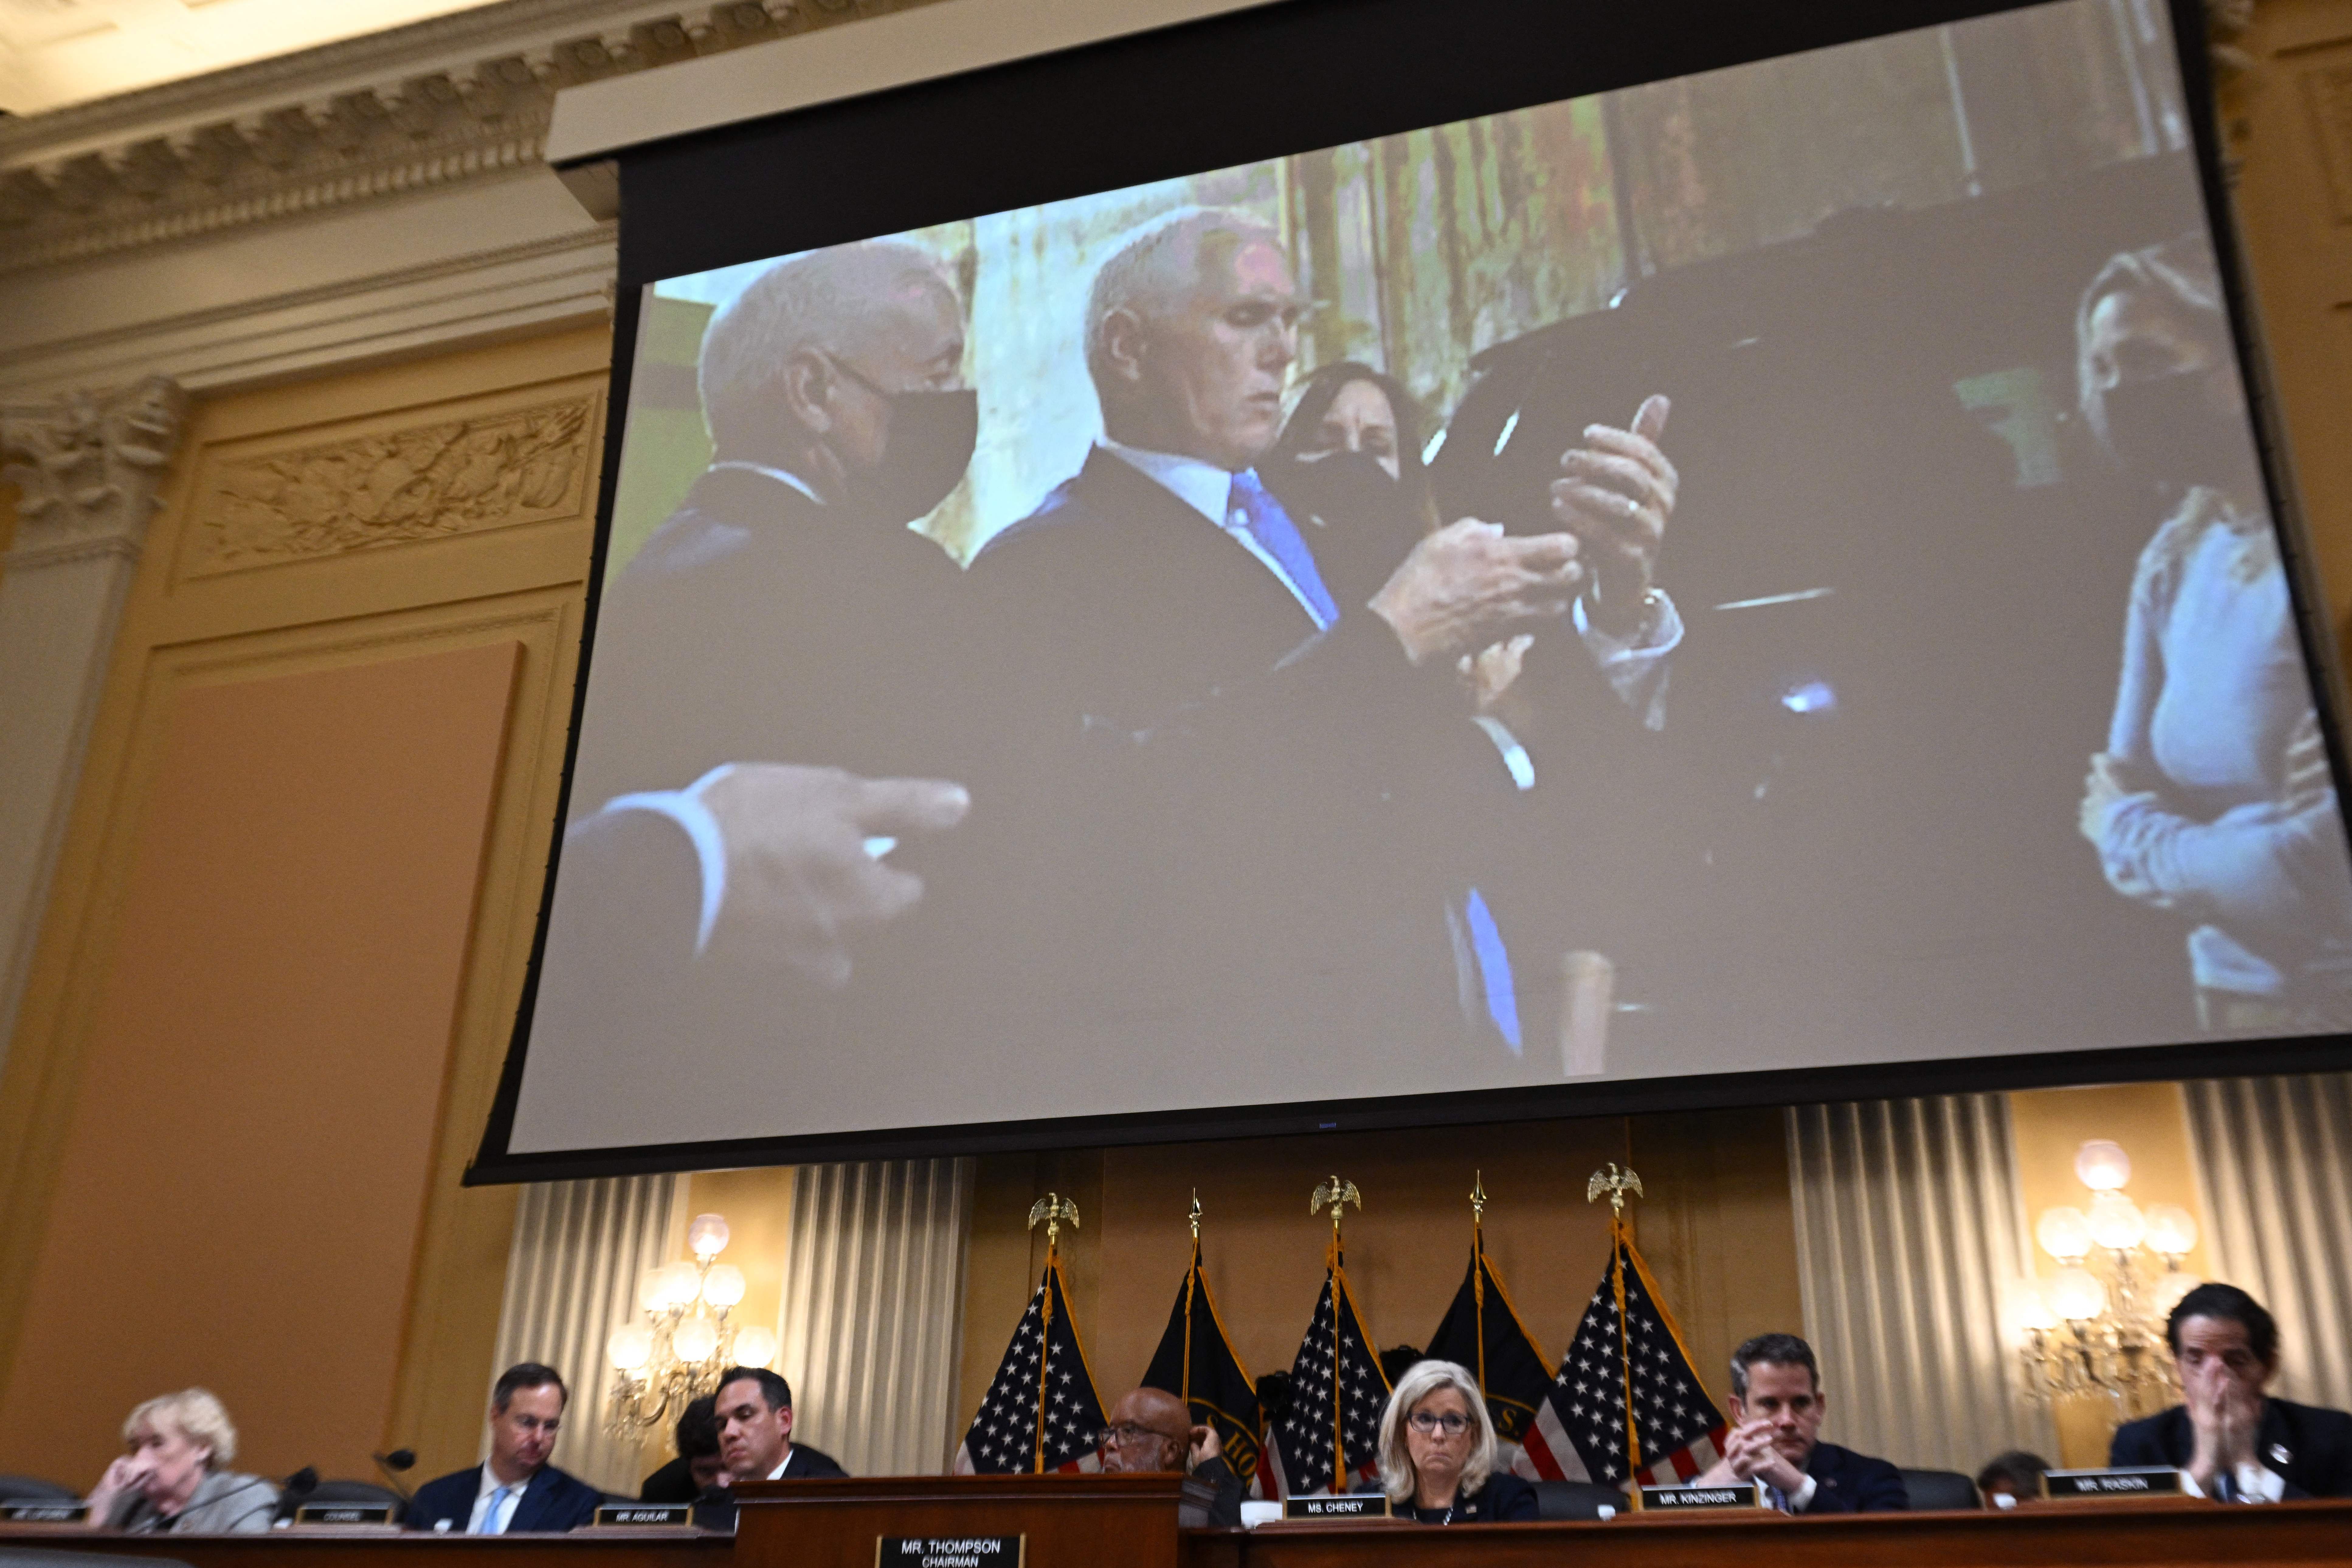 An image on a screen shows former US Vice President Mike Pence looking at his phone as he shelters on Jan. 6.